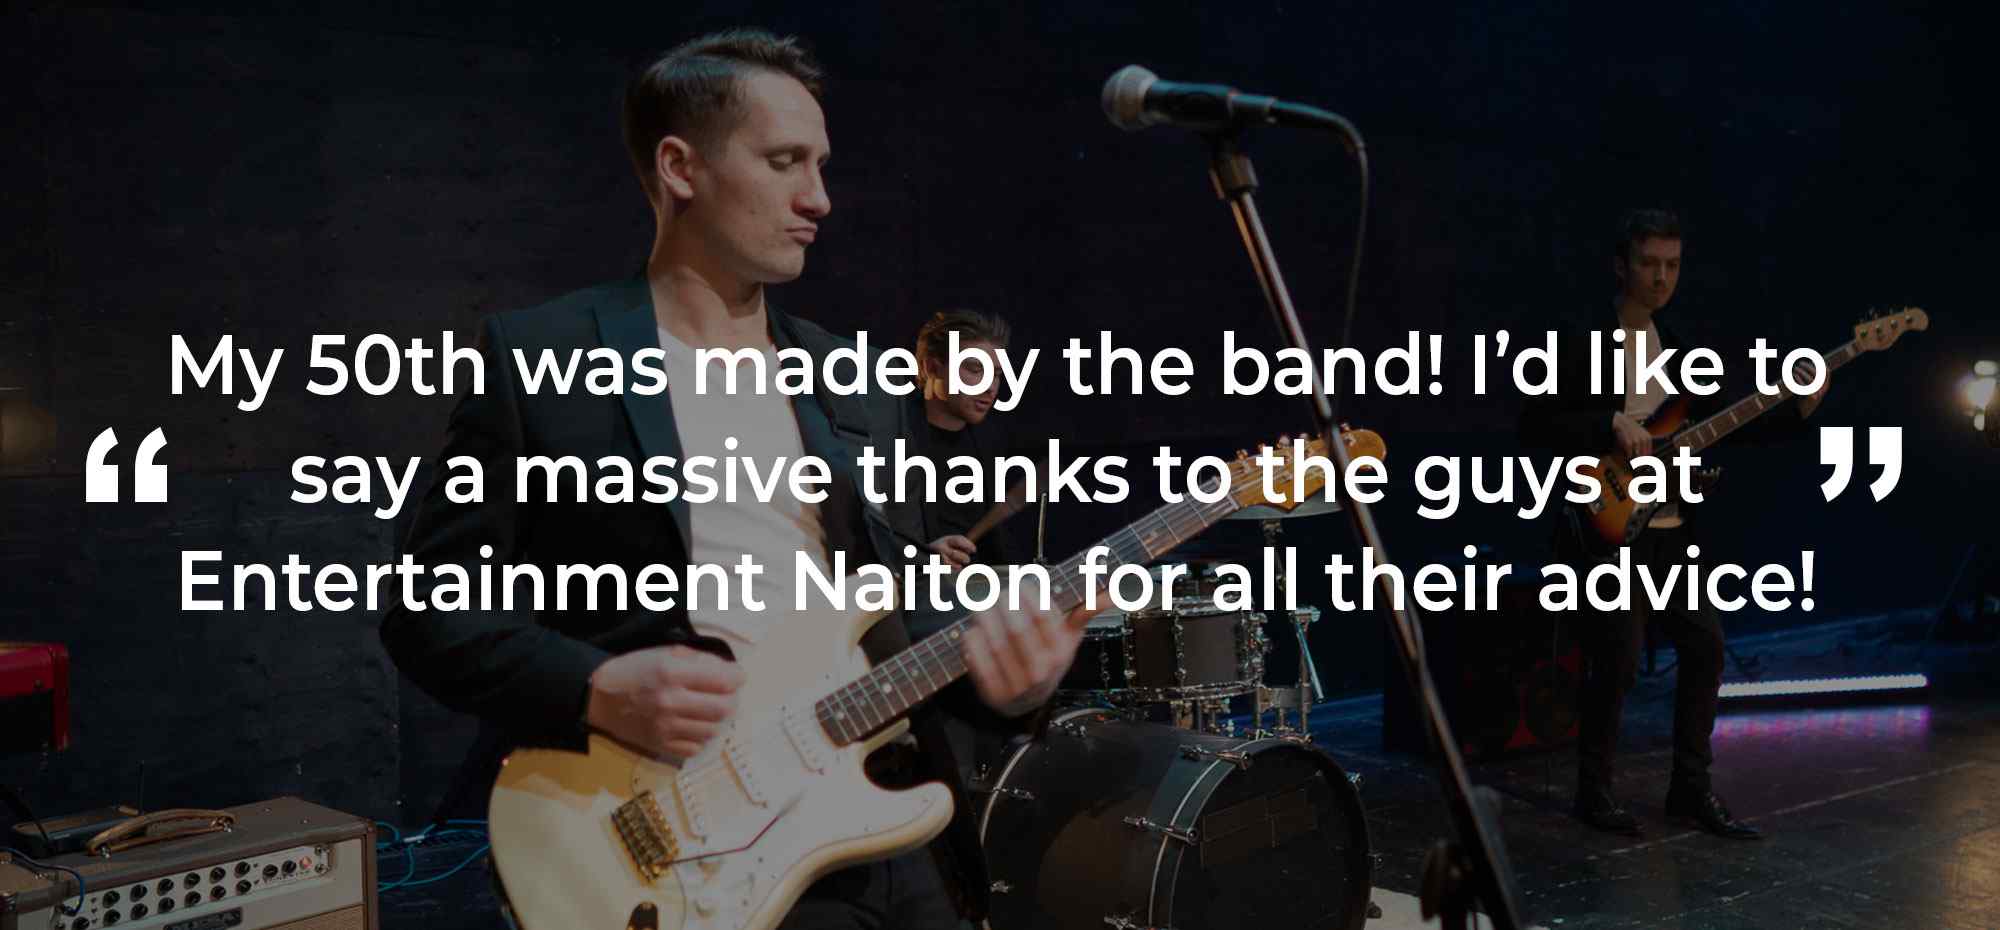 Client Review of a Party Band North Humberside